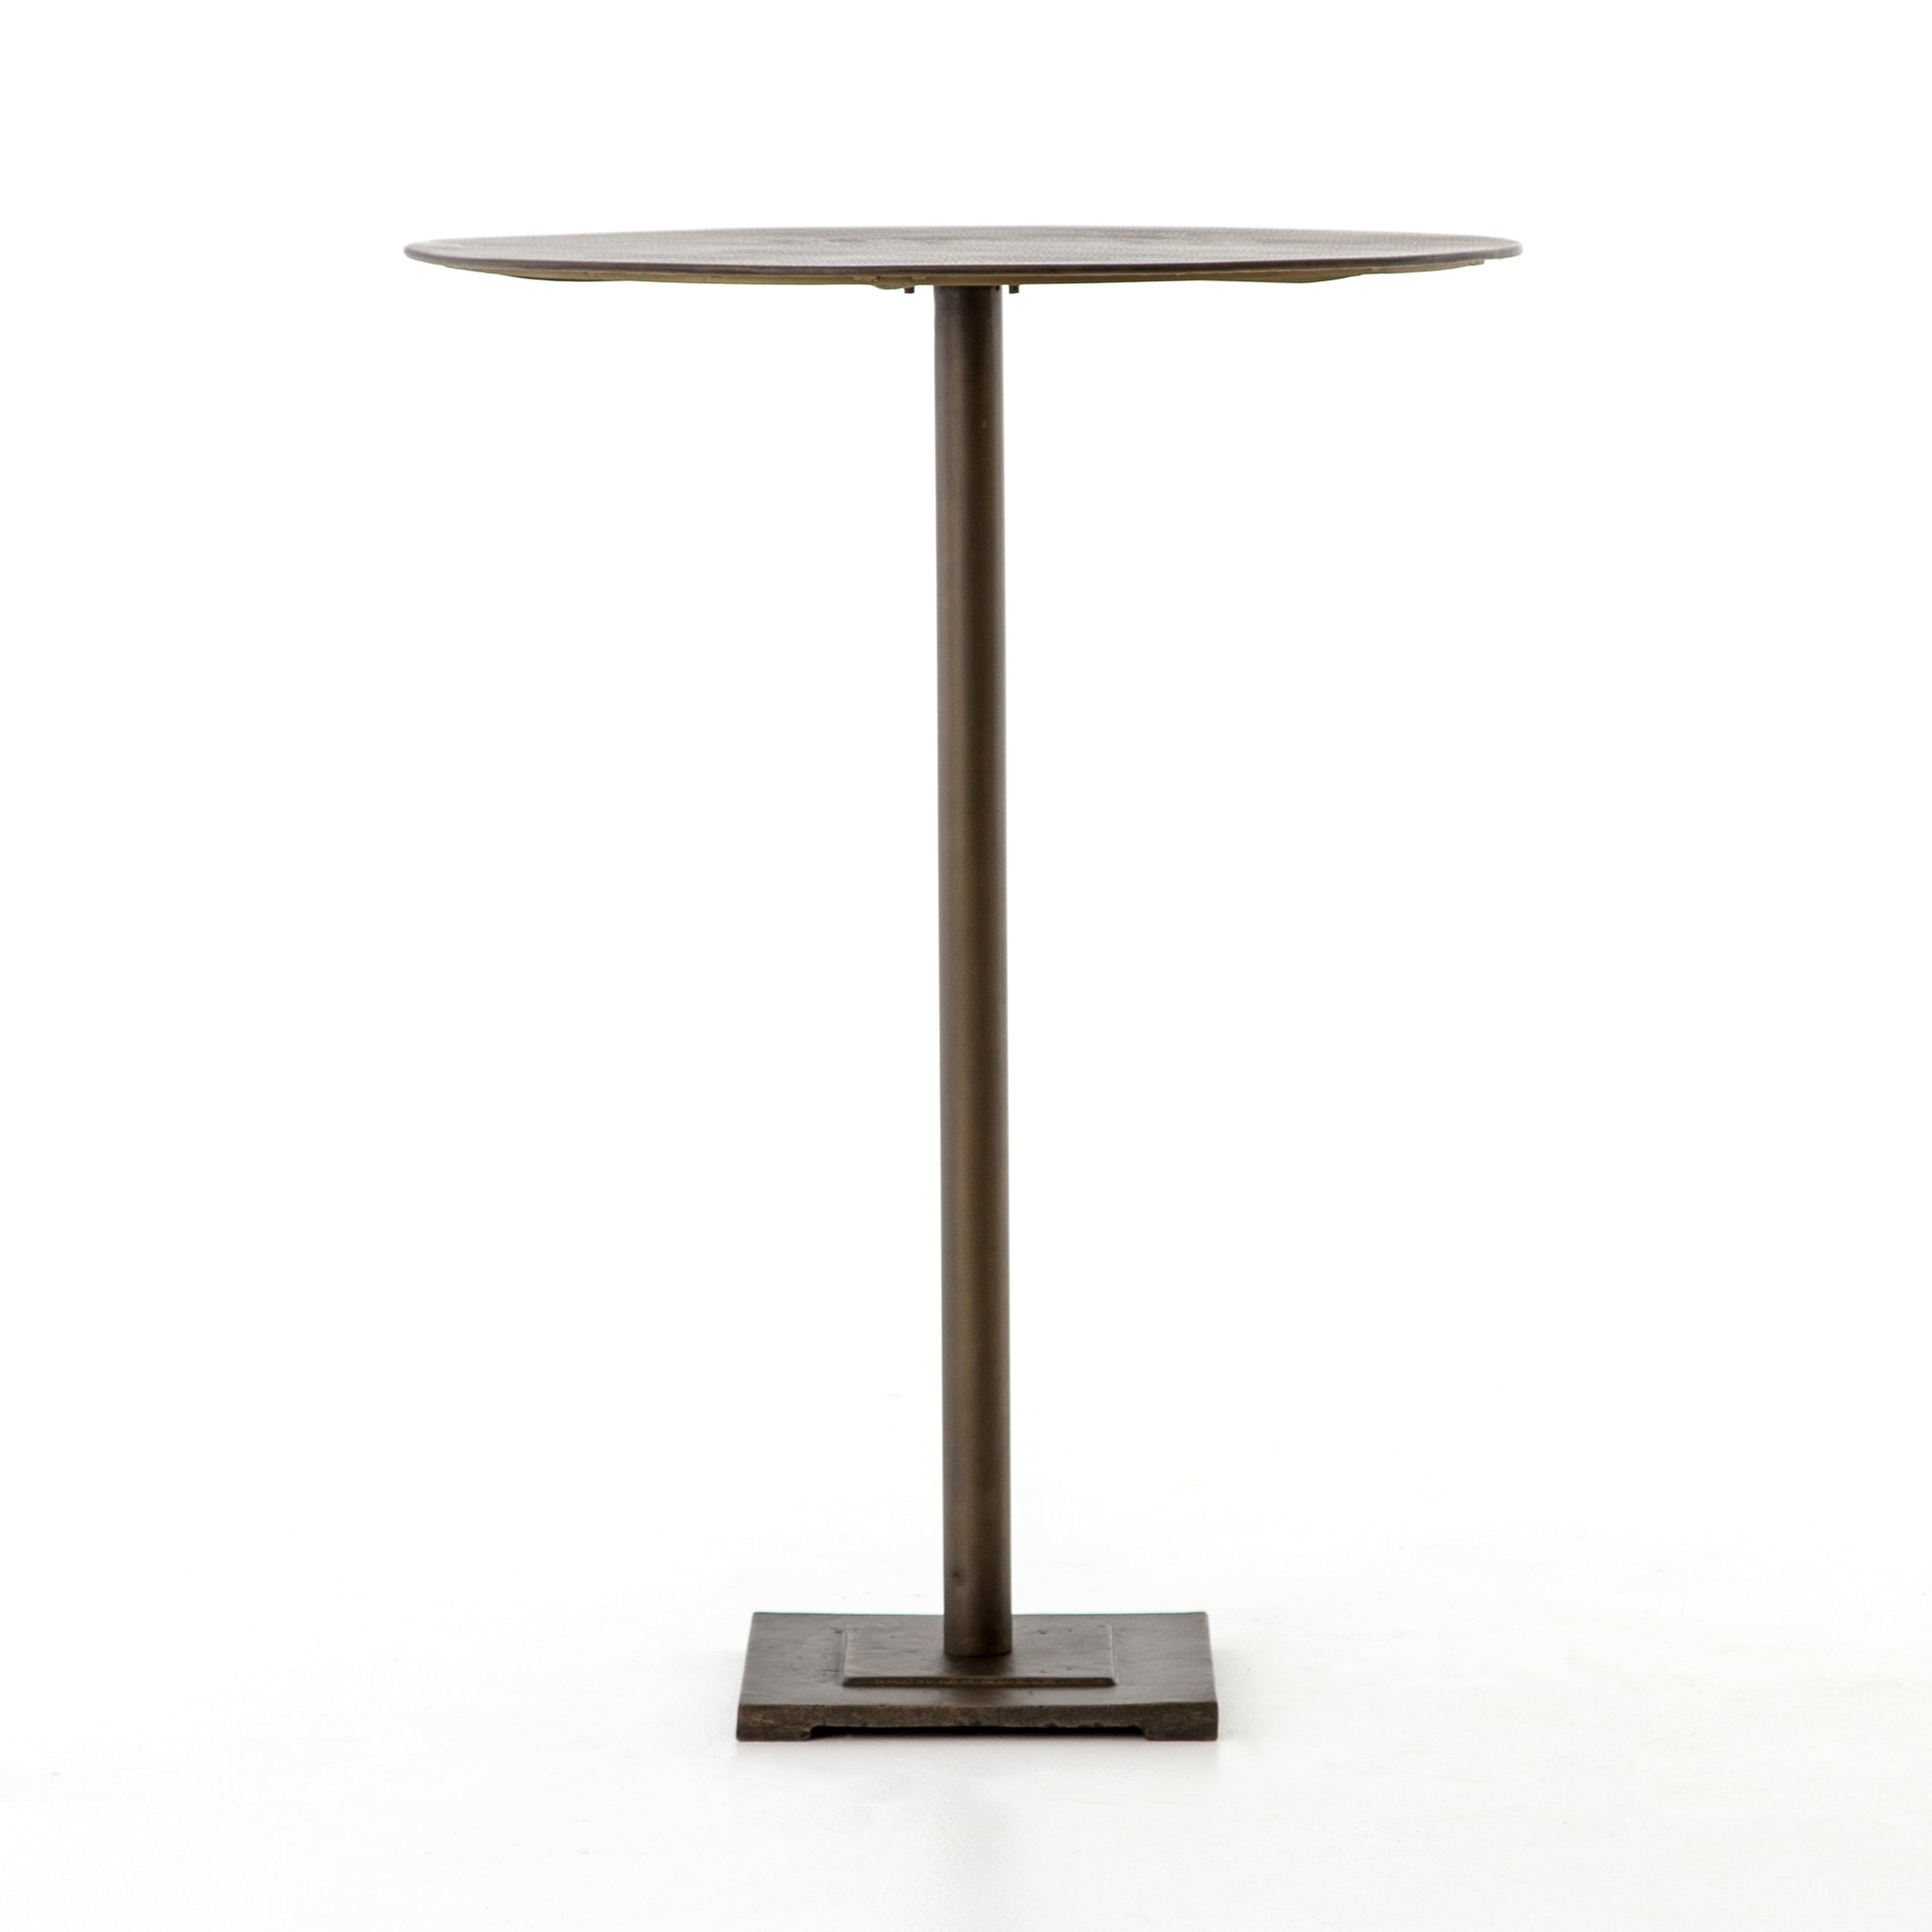 We love the antique brass finish of this Fannin Bar + Counter Table. The acid-etched top pattern sets an industrial pace for this pedestal-style bistro table, perfect for any lounge or bar area.   Colors: Aged Brass, Acid Etched Aged Brass Materials: Iron